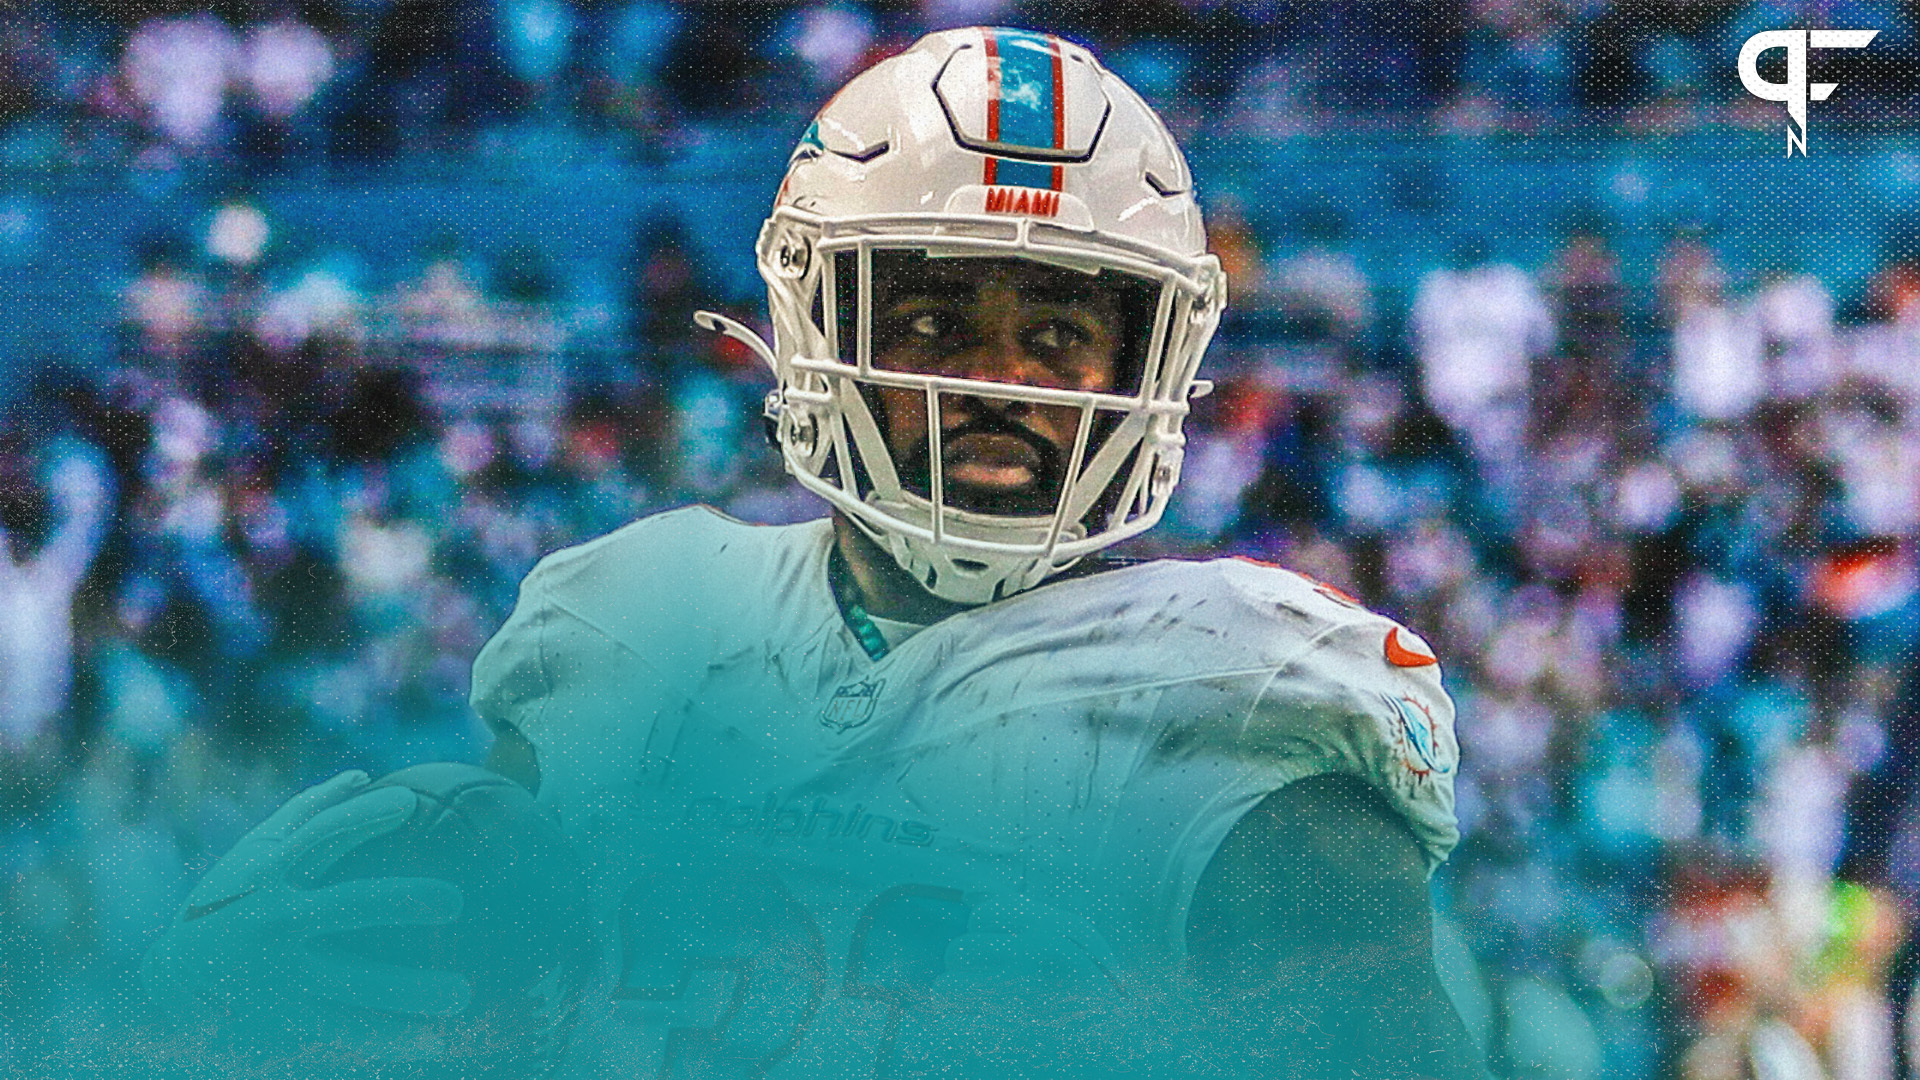 Miami Dolphins RB Raheem Mostert wins PFN Offensive Player of the Week.